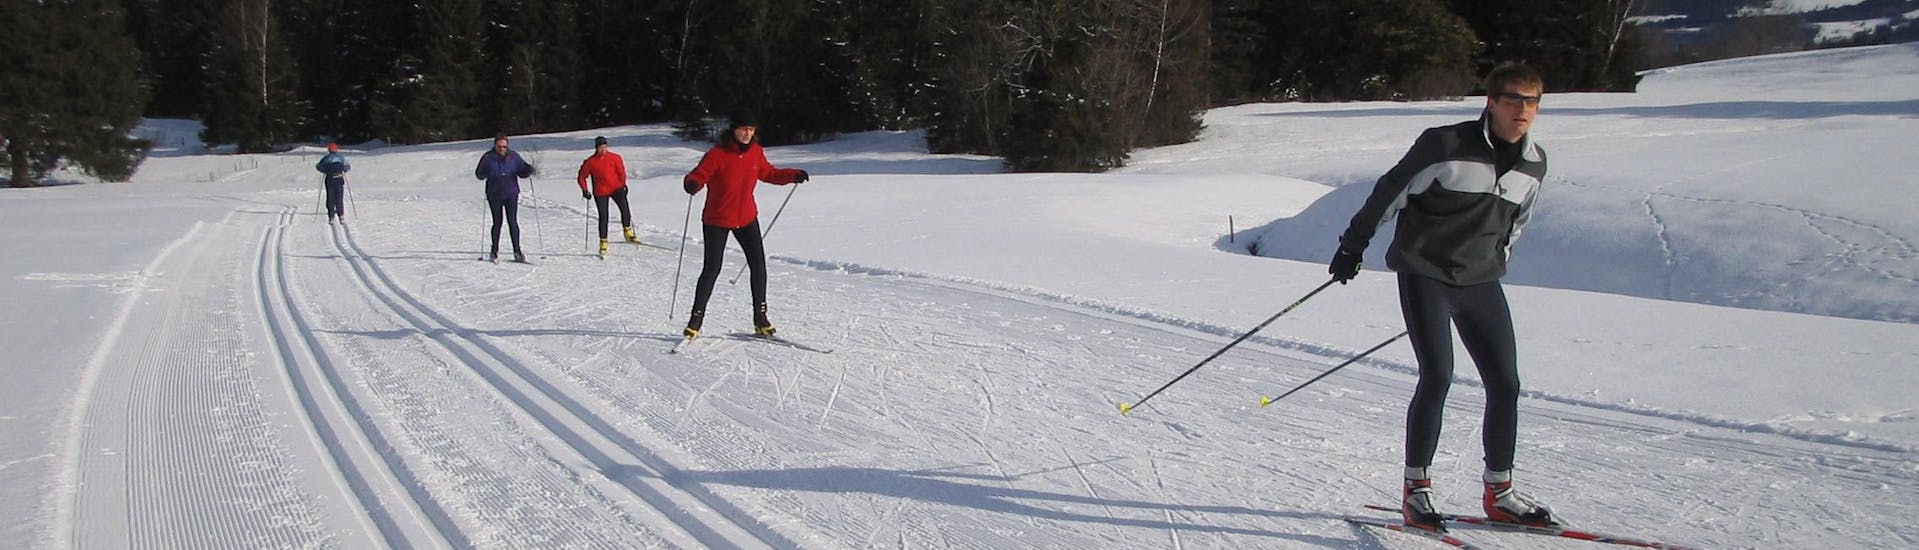 Cross Country Skiing Lessons for All Levels (from 7 y.).